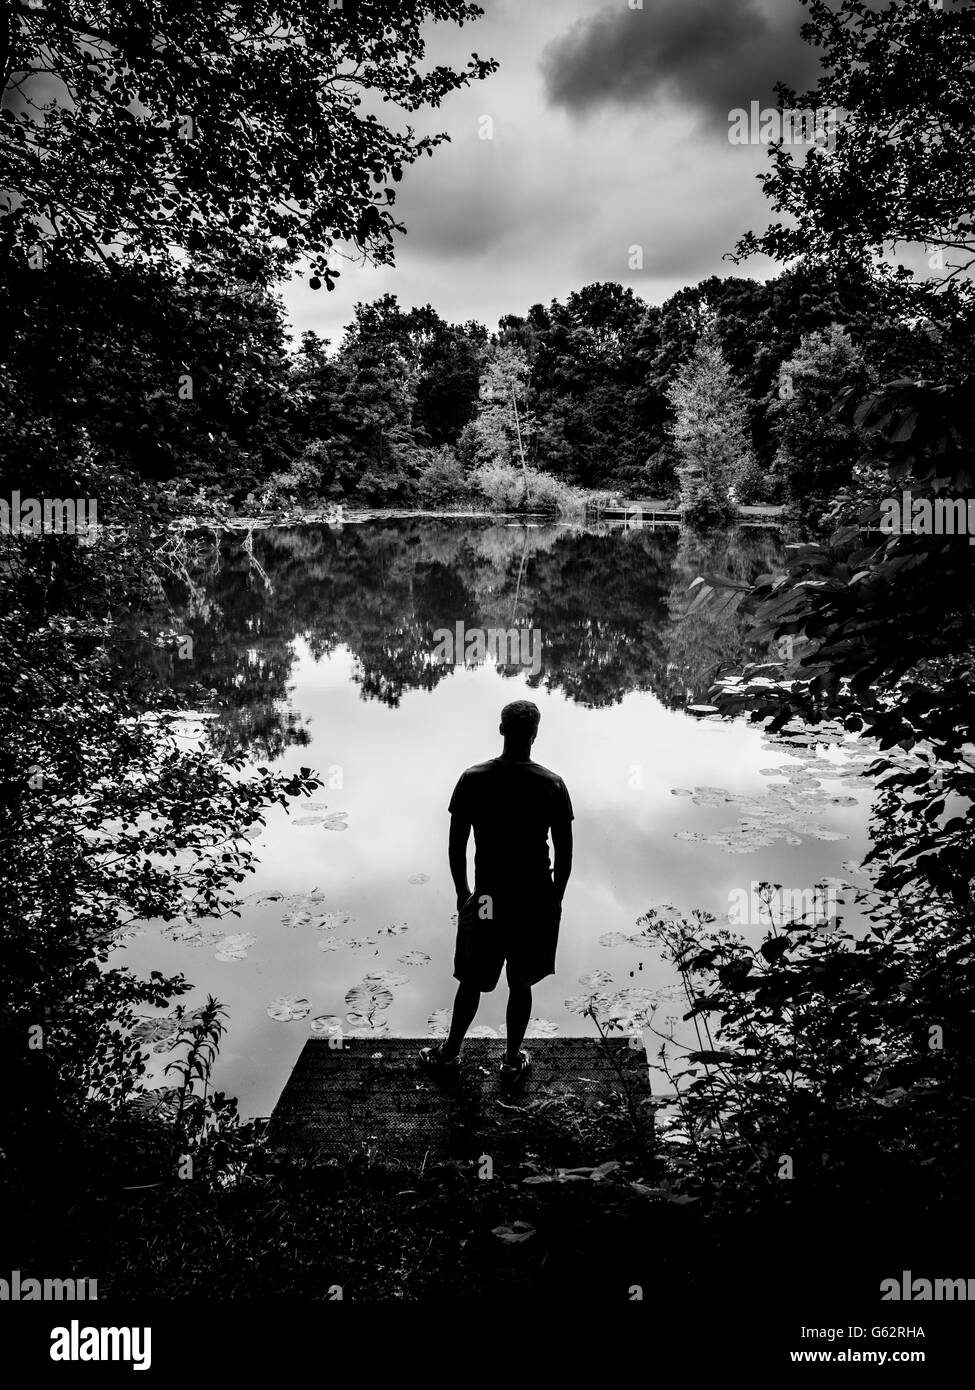 Silhouette of man stood on wooden jetty looking out over lake with trees surrounding edges Stock Photo